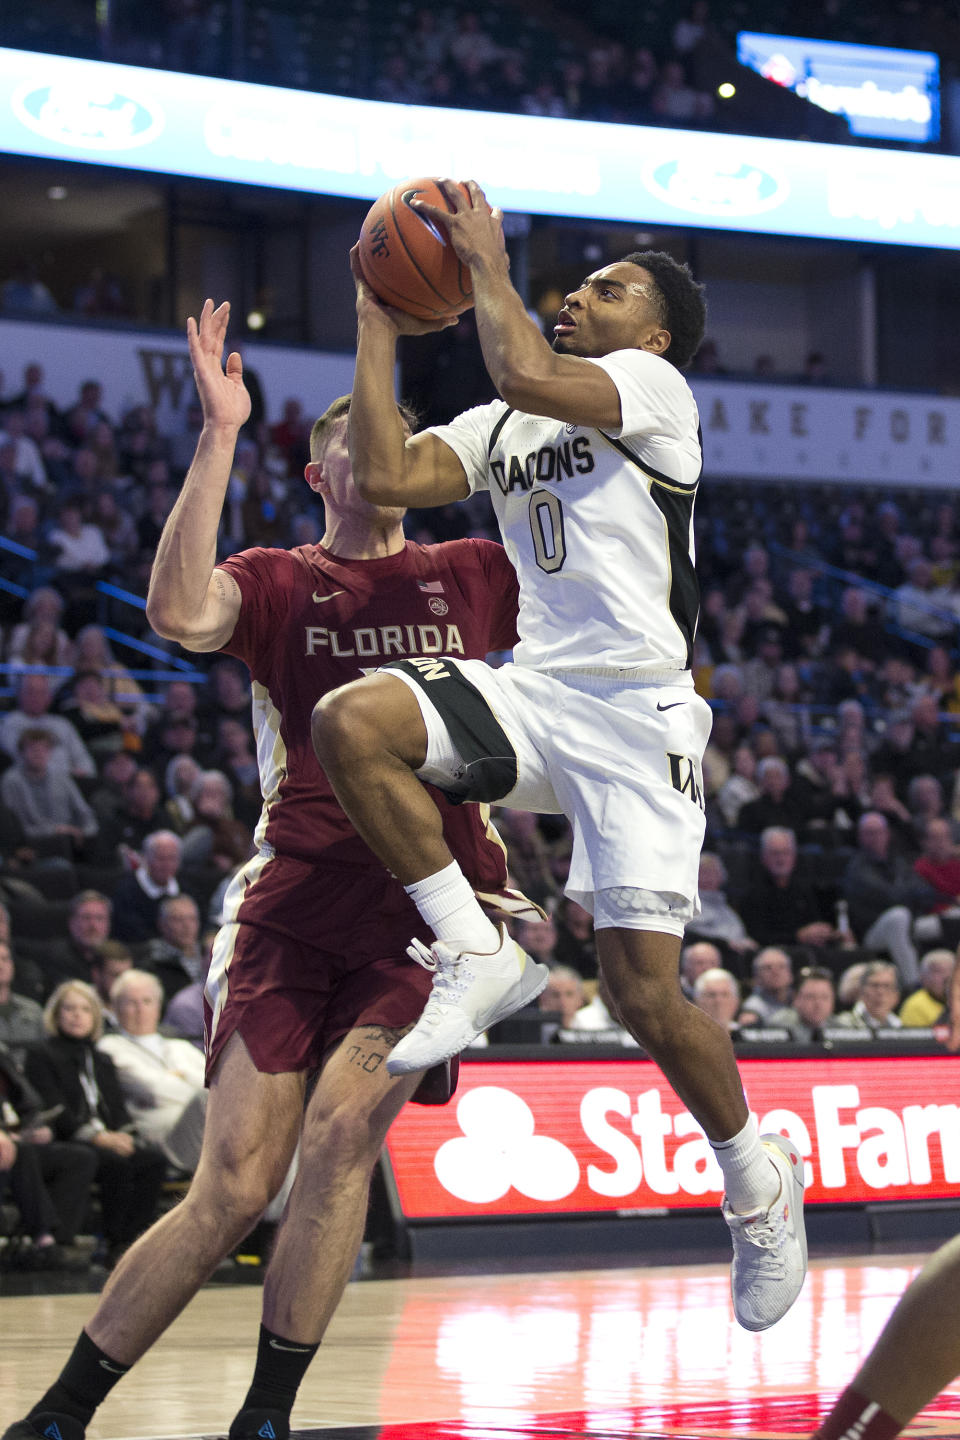 Wake Forest's Brandon Childress (0) shoots over Florida State's Dominik Olejniczak (15) in the first half of an NCAA college basketball game Wednesday, Jan. 8, 2020 in Winston-Salem, N.C. (AP Photo/Lynn Hey)